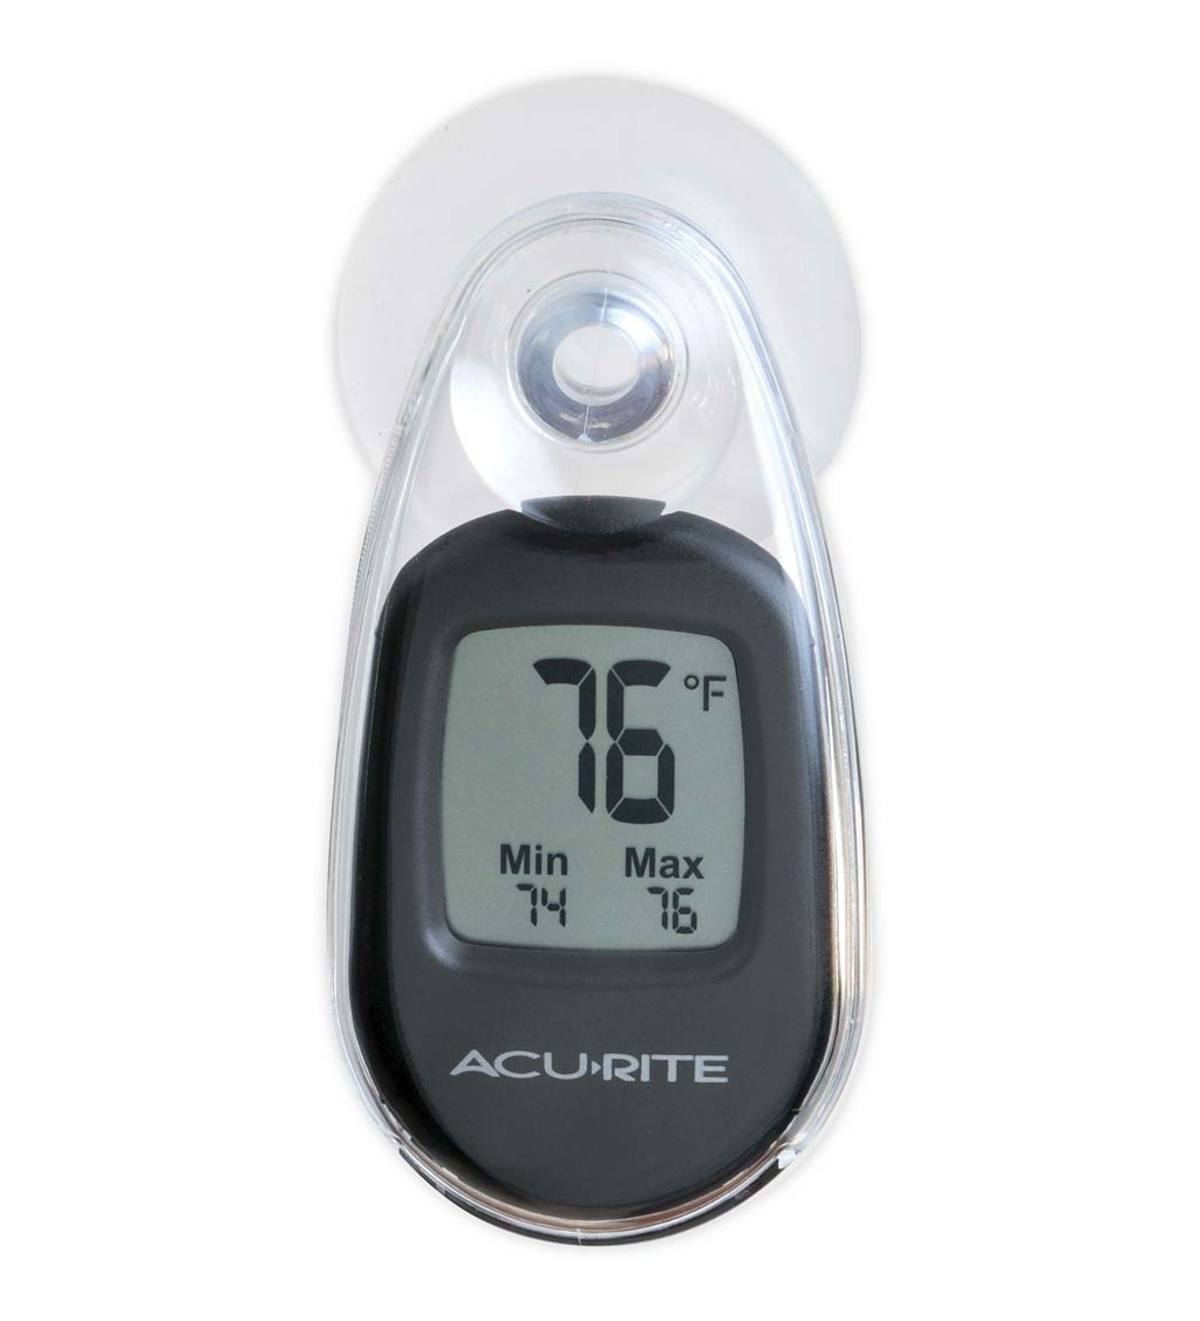 Indoor/Outdoor Digital Thermometer with Suction Cup Window Mount - Black